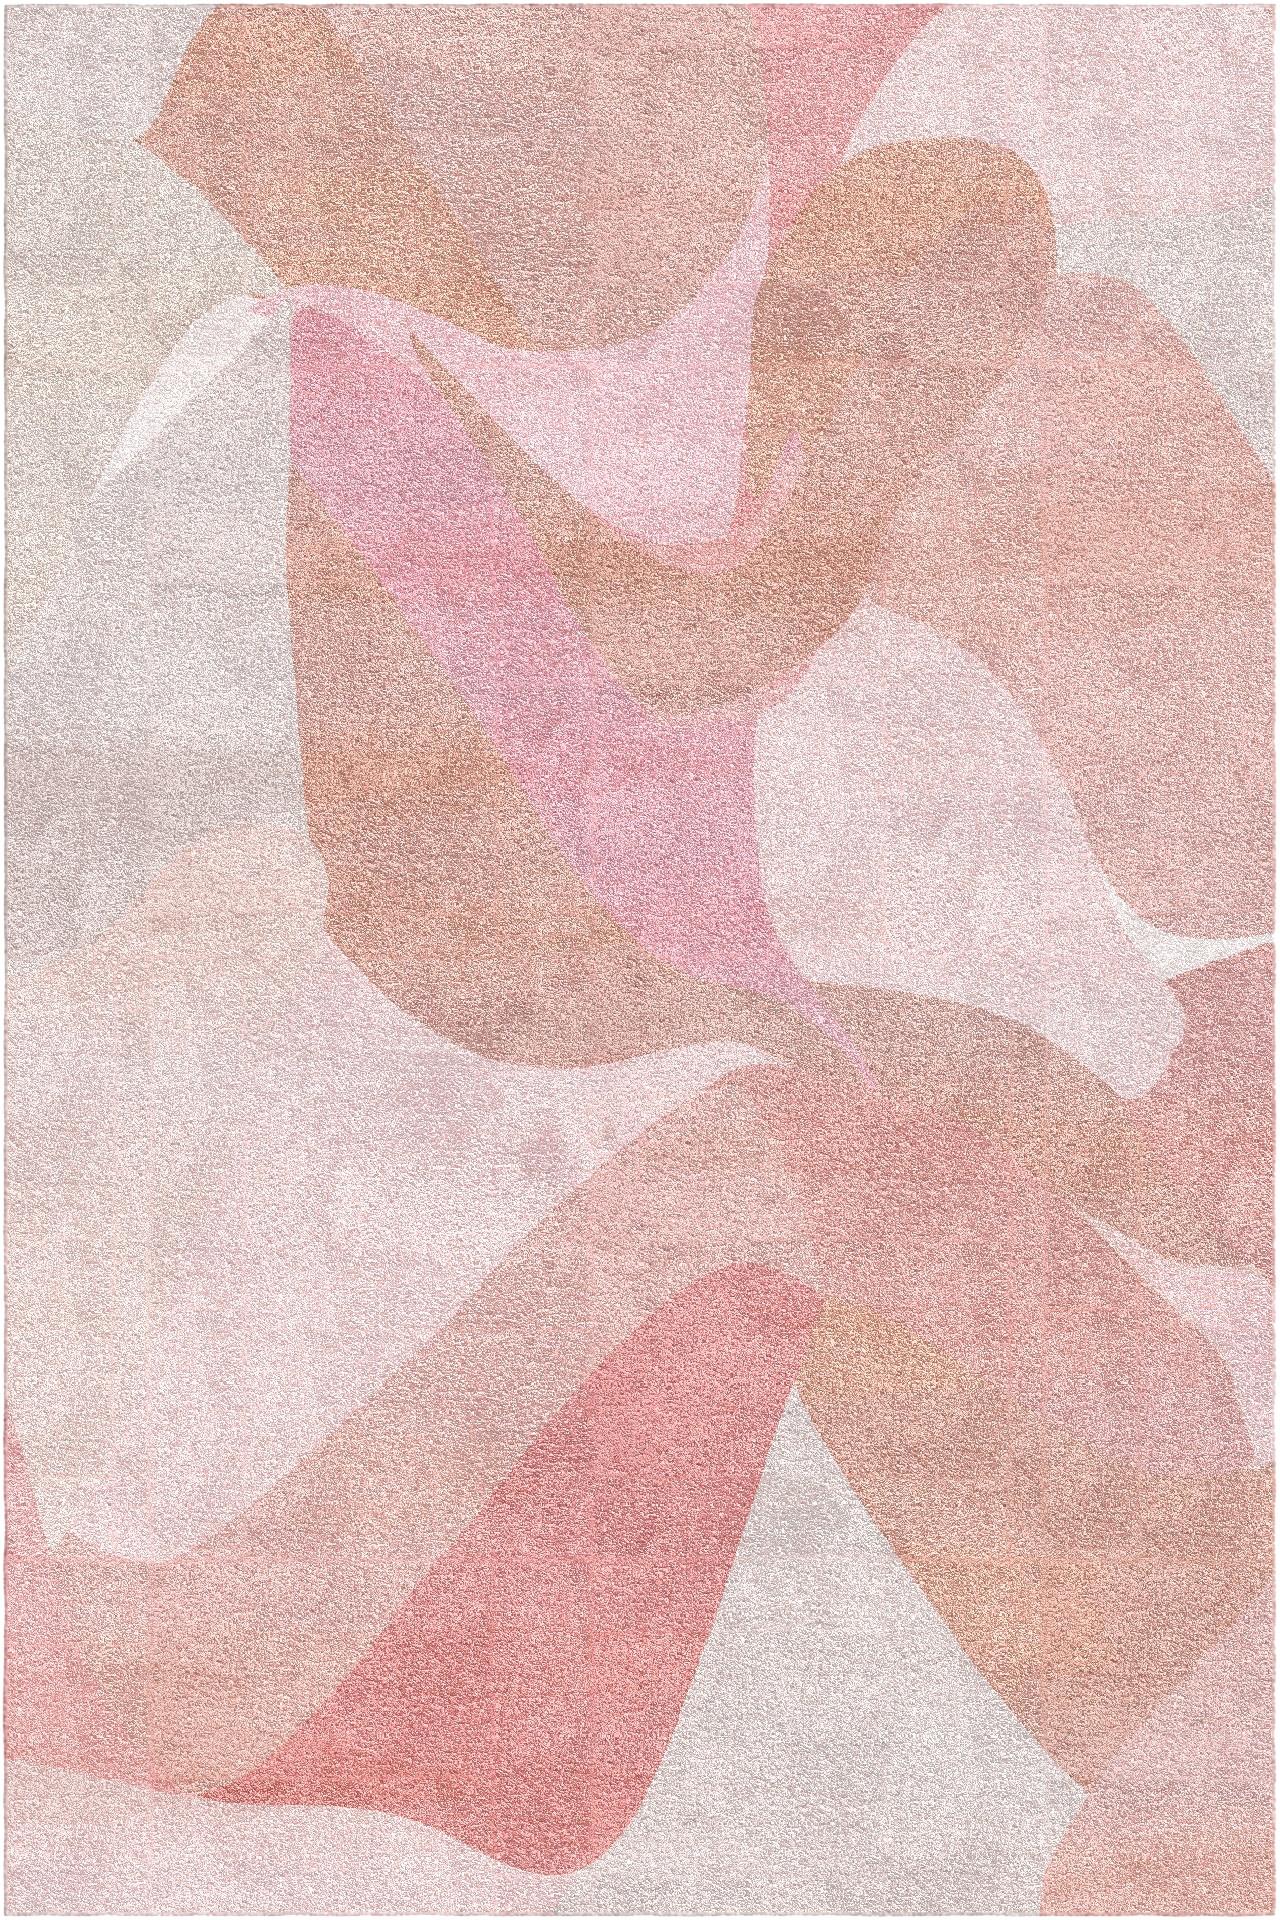 Dune rug III by Vanessa Ordoñez.
Dimensions: D 300 x W 200 x H 1.5 cm
Materials: Bamboo fibers and linen.

A stunning collaboration of Vanessa Ordonez with Malcusa, this rug is part of a series inspired by the designer’s intimate connection with